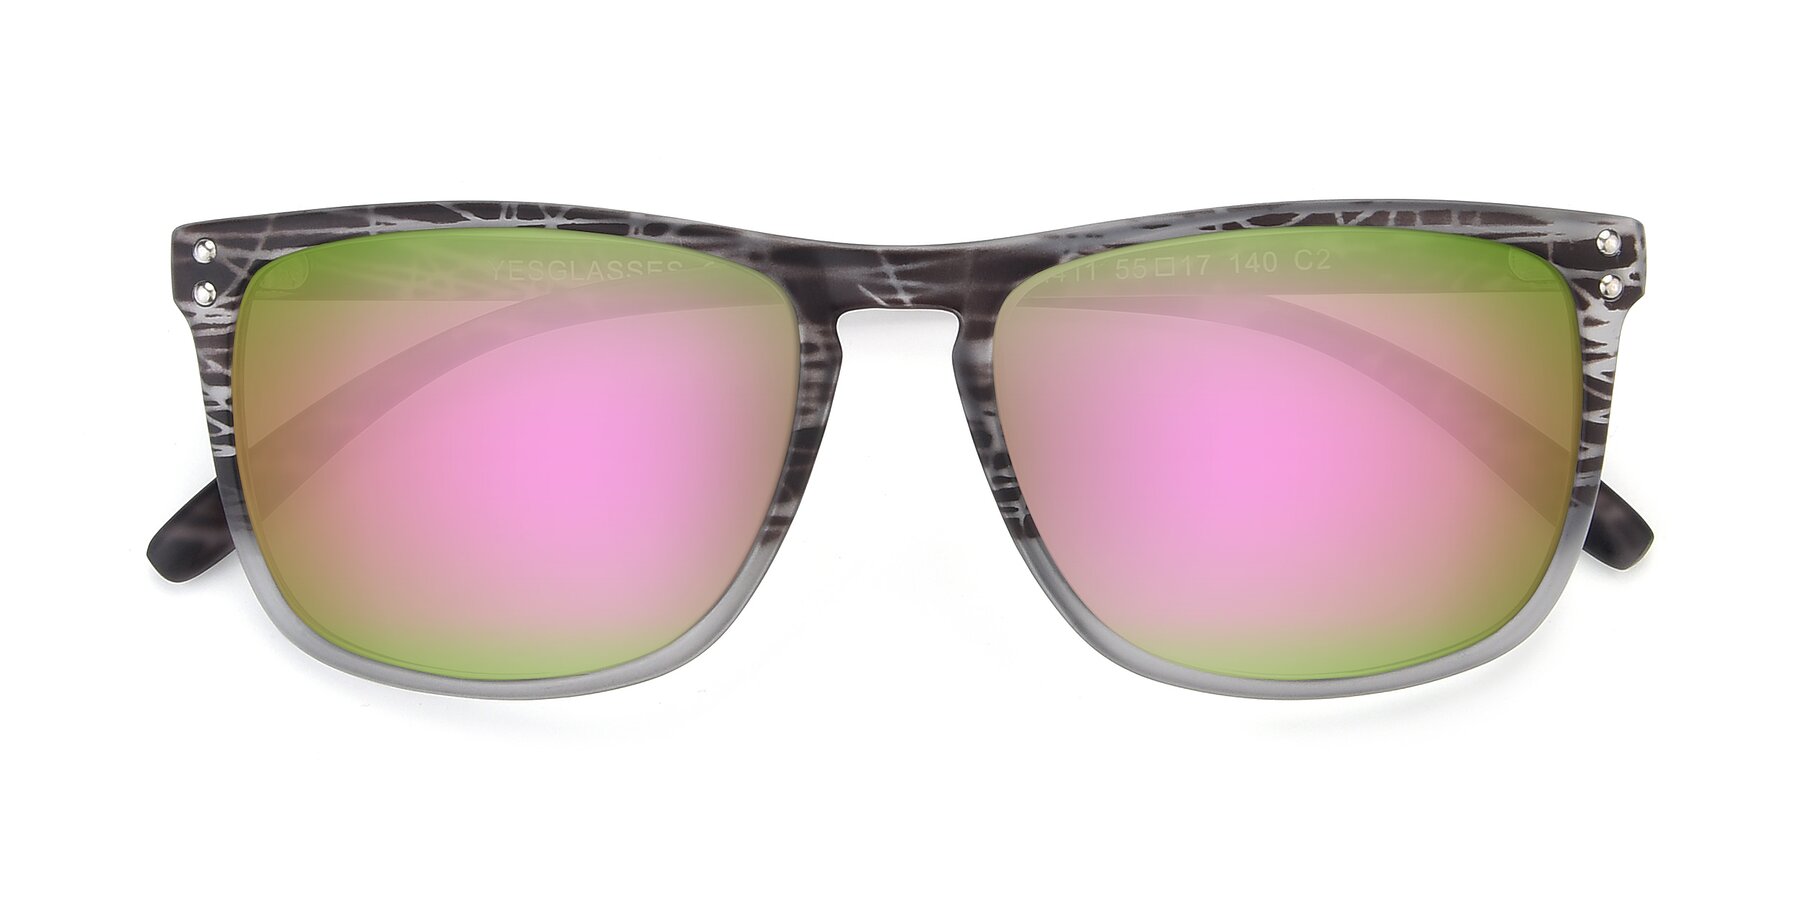 View of SSR411 in Translucent Floral Grey with Pink Mirrored Lenses